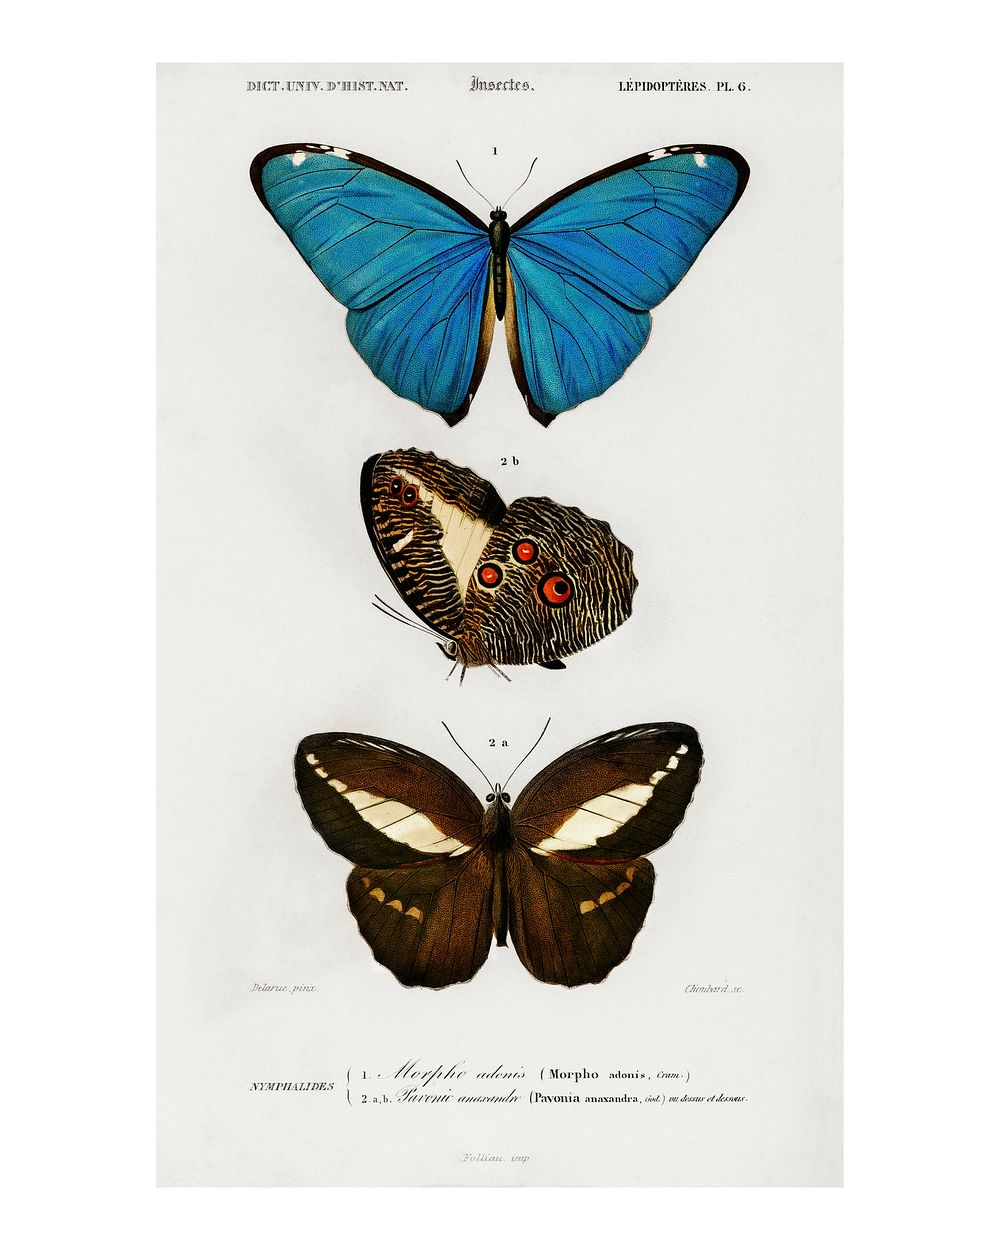 Different types of butterfly vintage illustration wall art print and poster design remix from the original artwork.